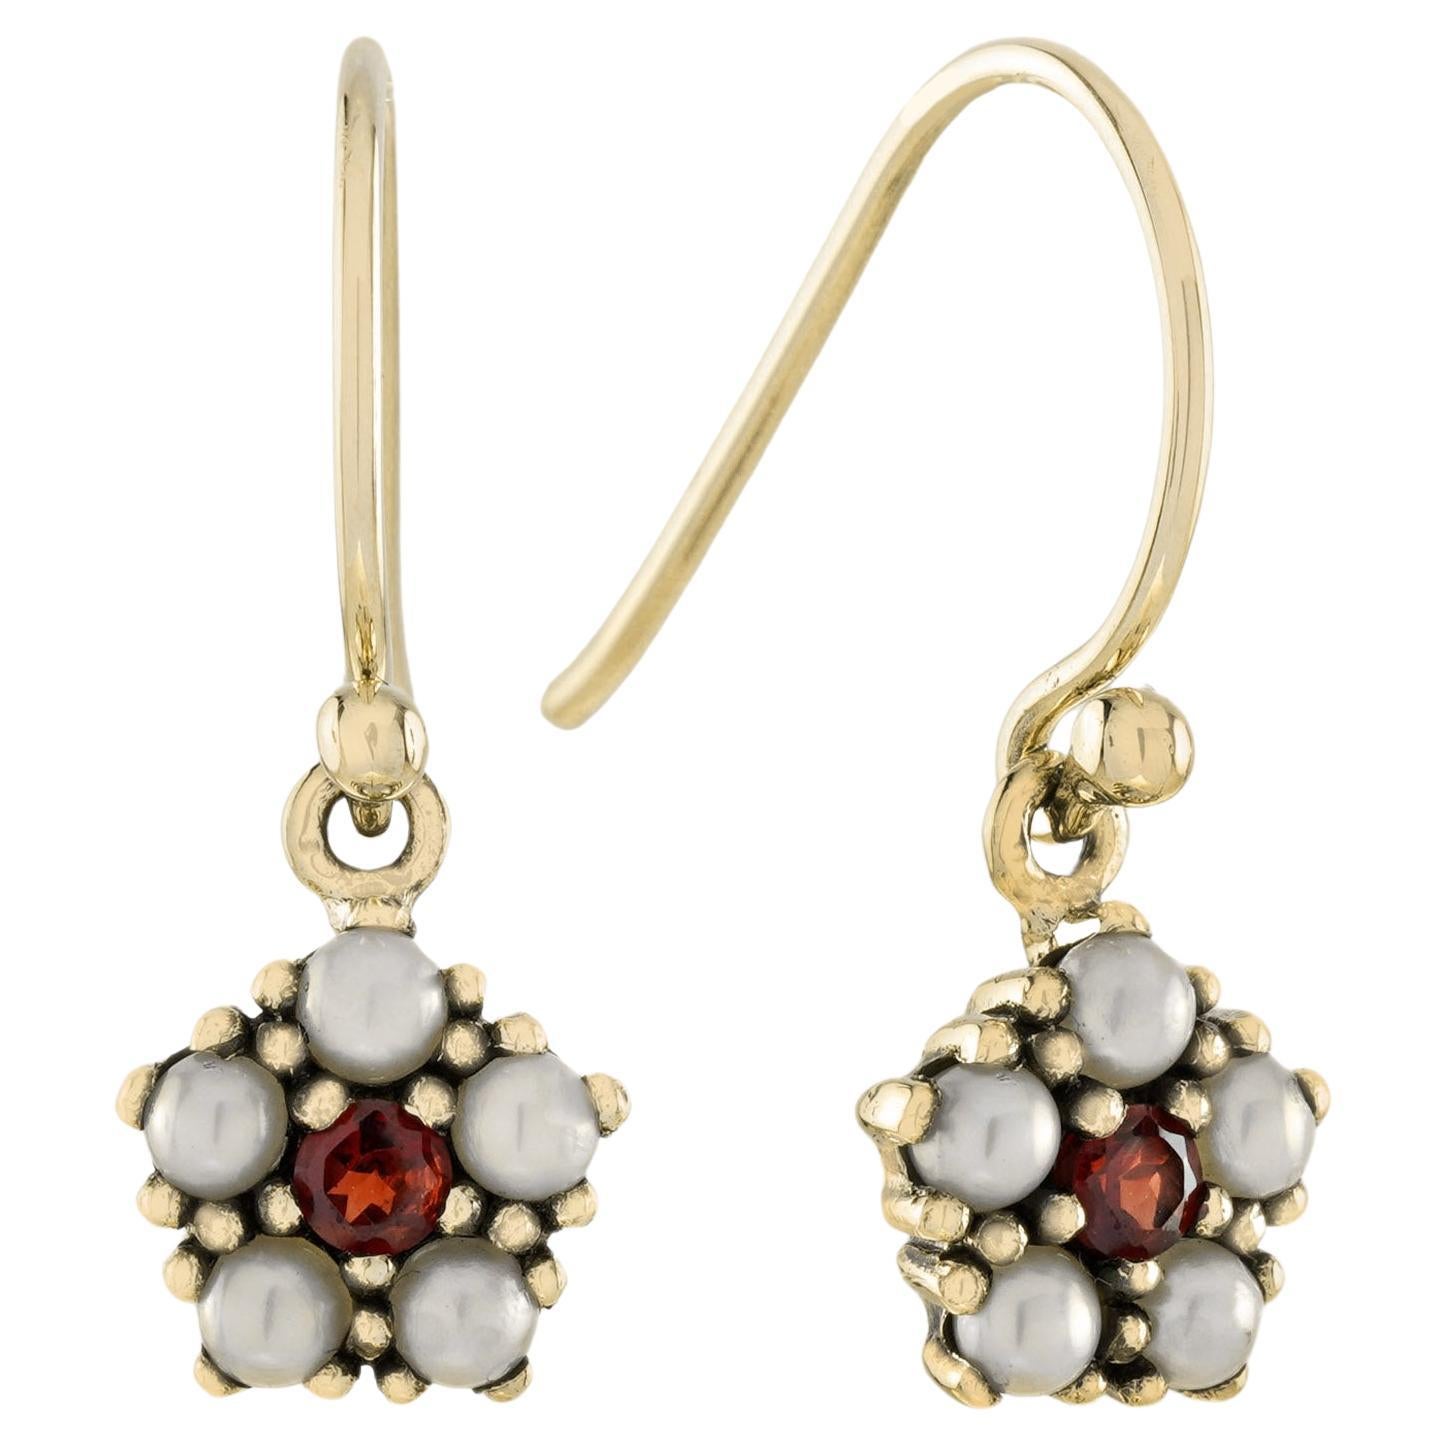 Natural Garnet and Pearl Vintage Style Floral Dangle Earrings in Solid 9K Gold